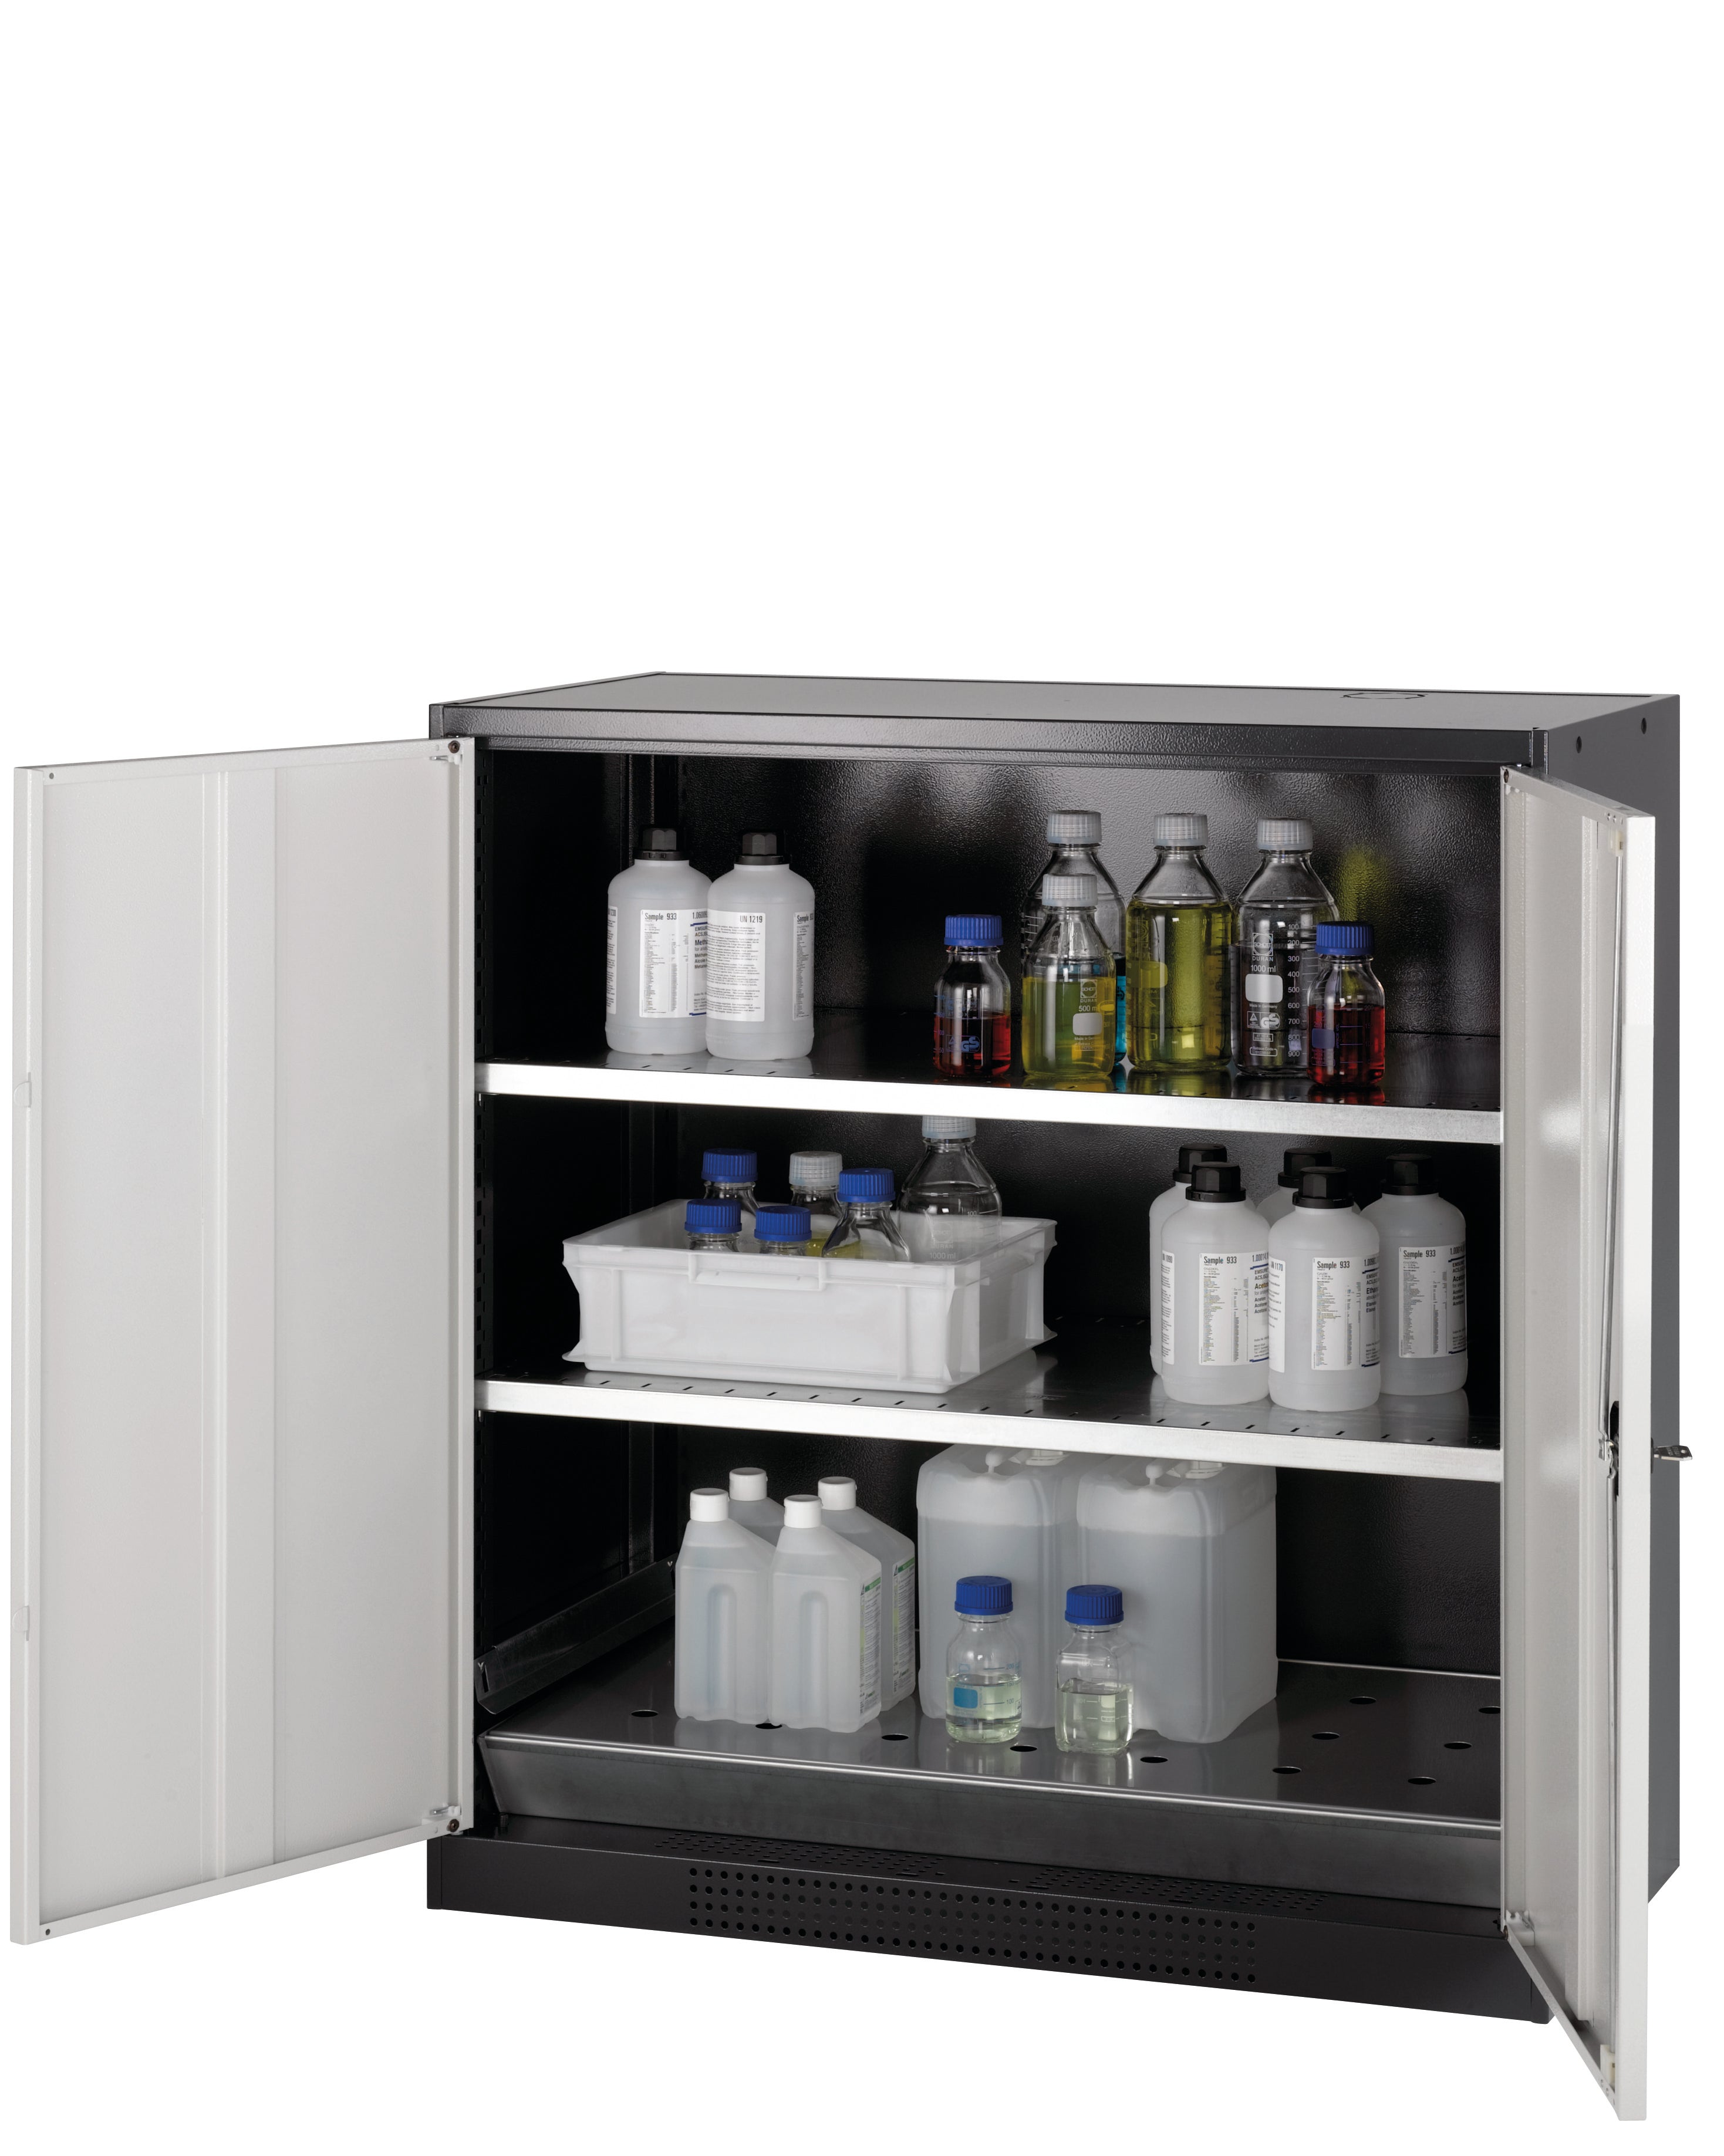 Chemical cabinet CS-CLASSIC model CS.110.105 in light gray RAL 7035 with 2x standard shelves (sheet steel)